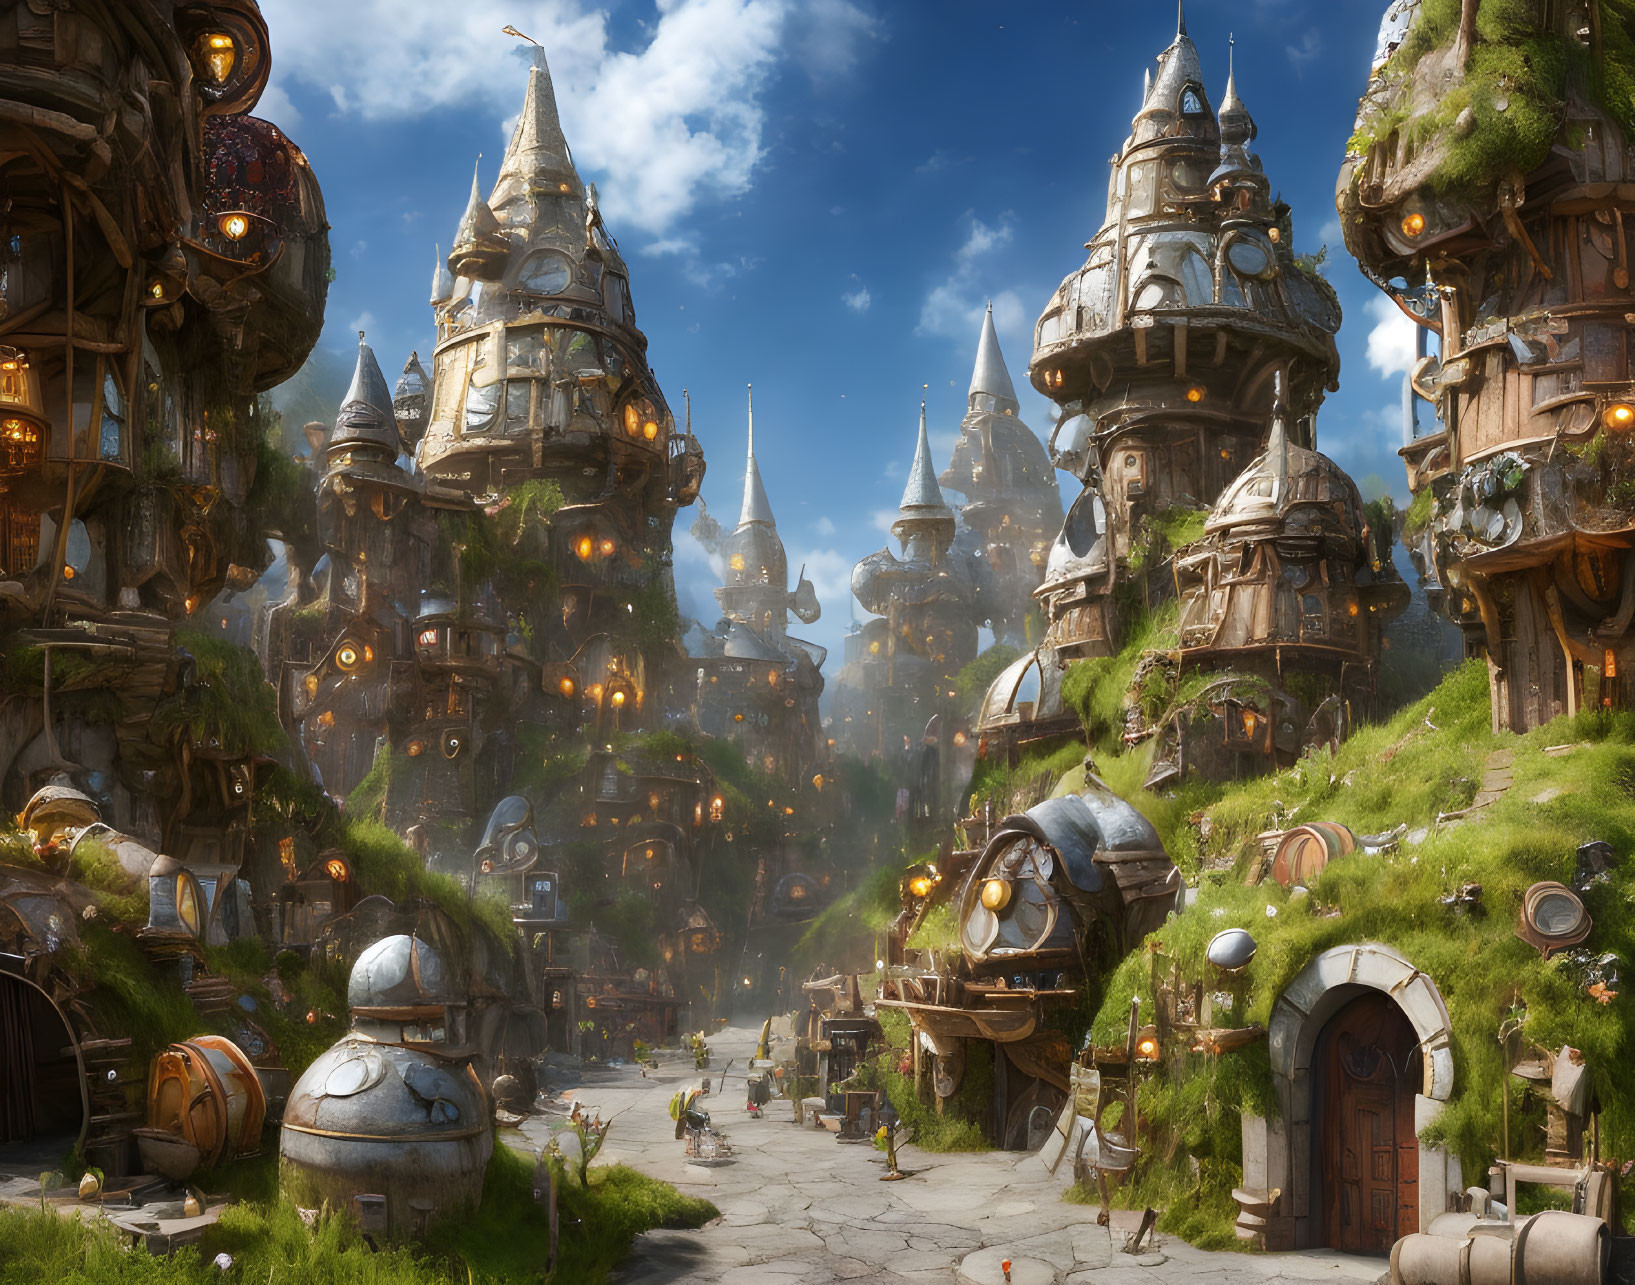 Fantasy village with intricate towers and houses amidst lush hills and golden light